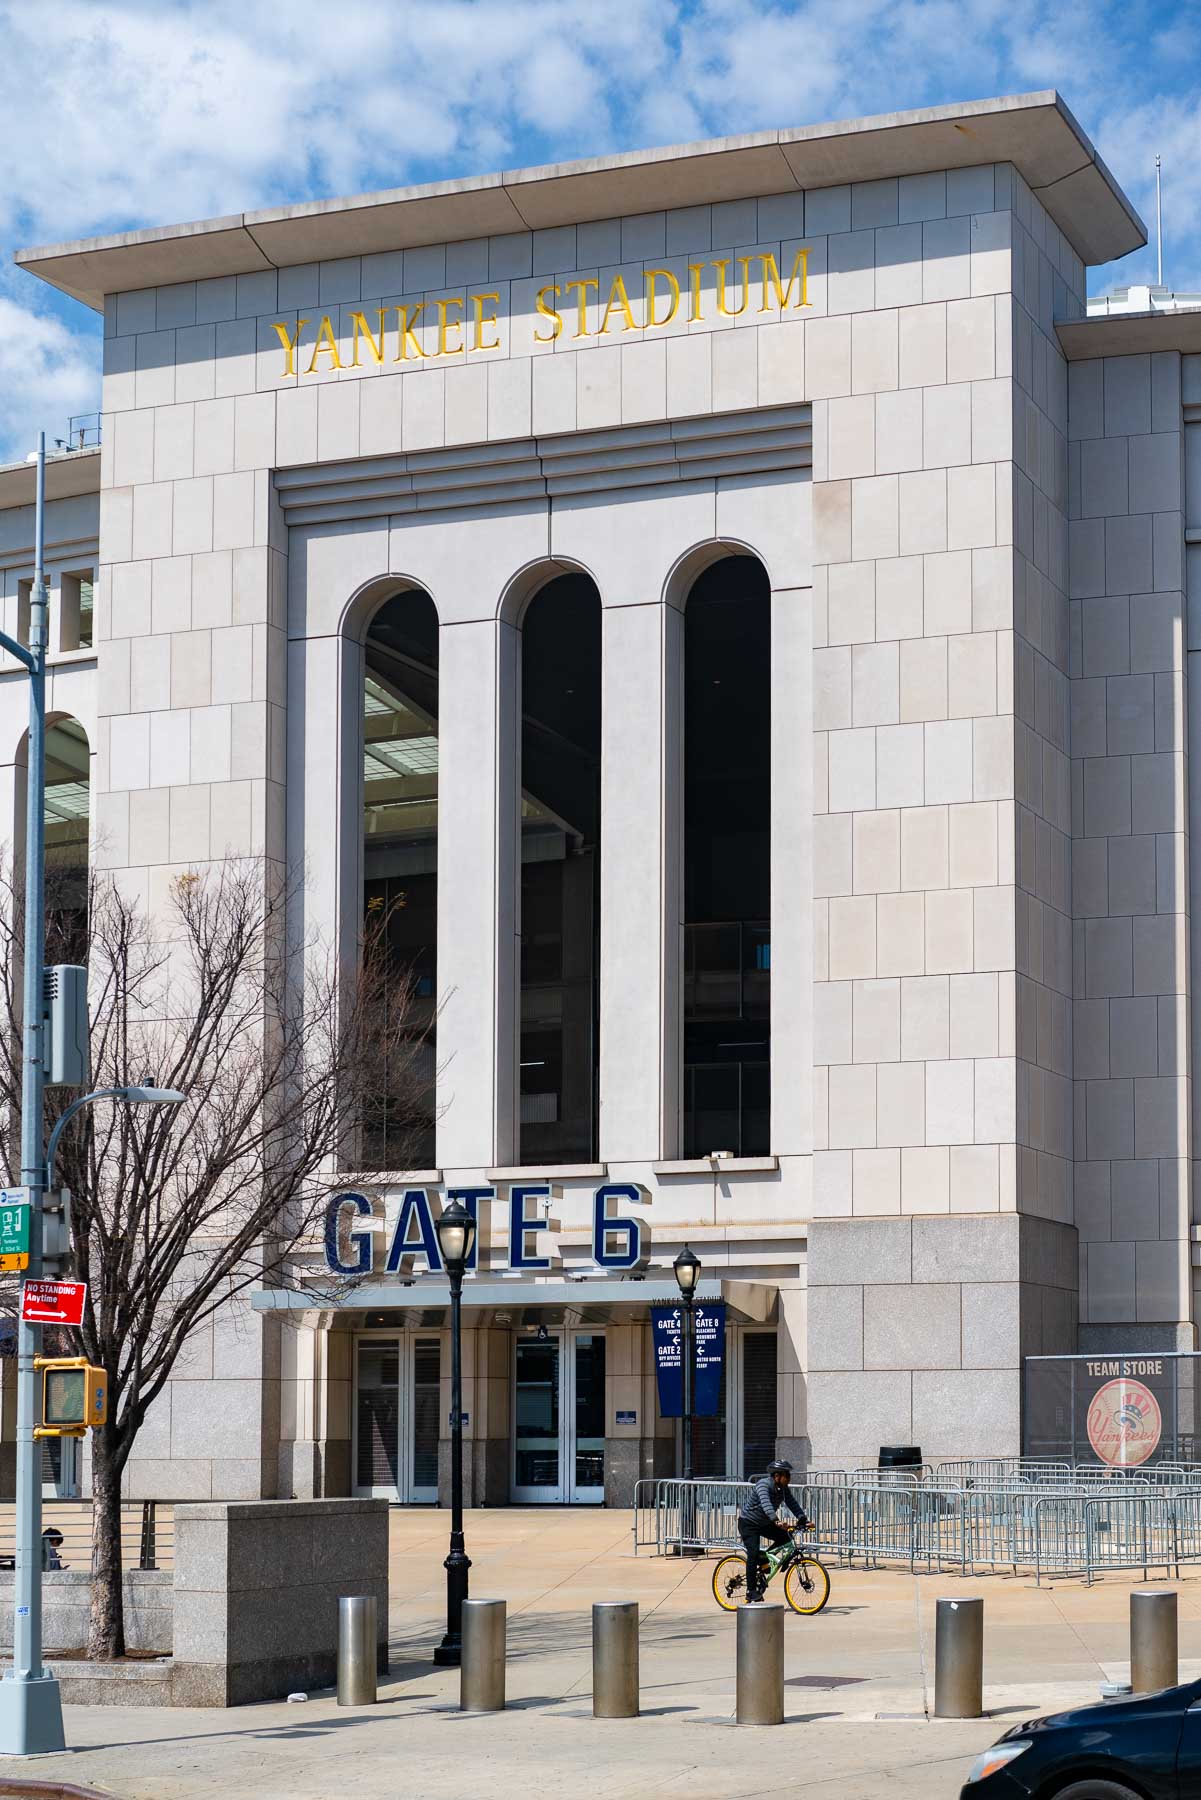 Photo of Gate 6 entrance at Yankee stadium with a man on a bike riding past